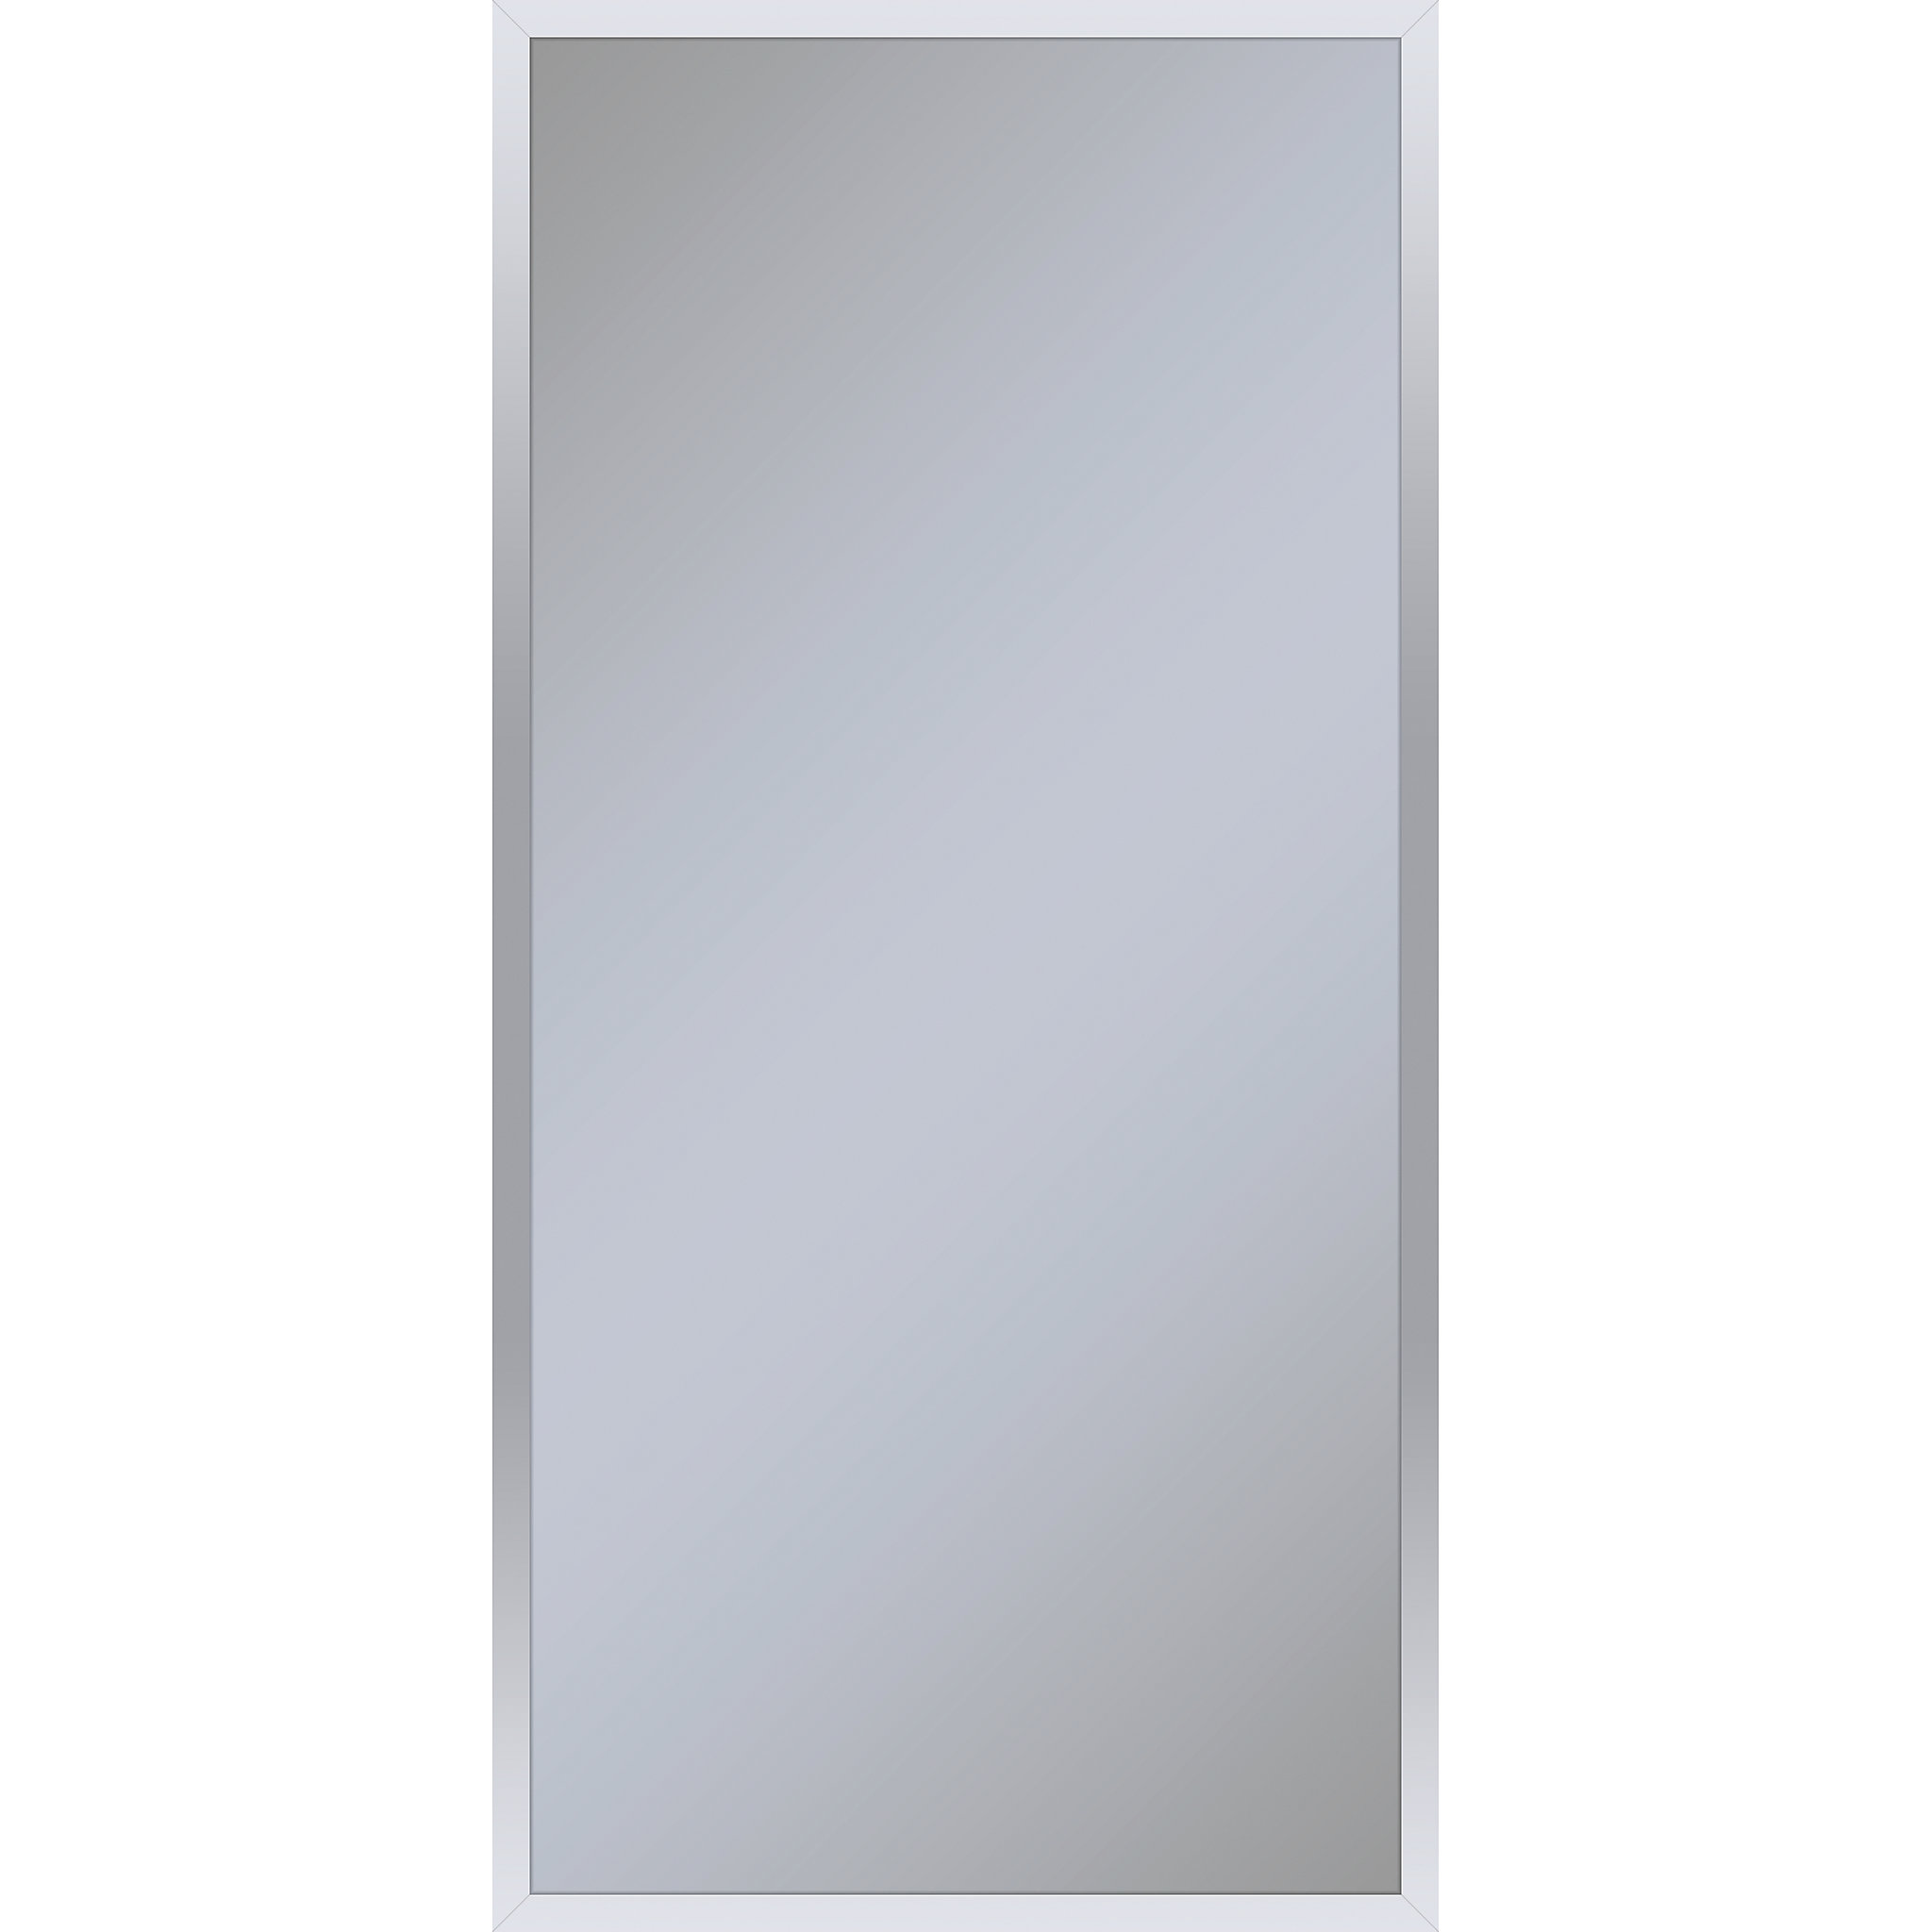 Robern PC2040D4TLE76 Profiles Framed Cabinet, 20" x 40" x 4", Chrome, Electrical Outlet, USB Charging Ports, Left Hinge